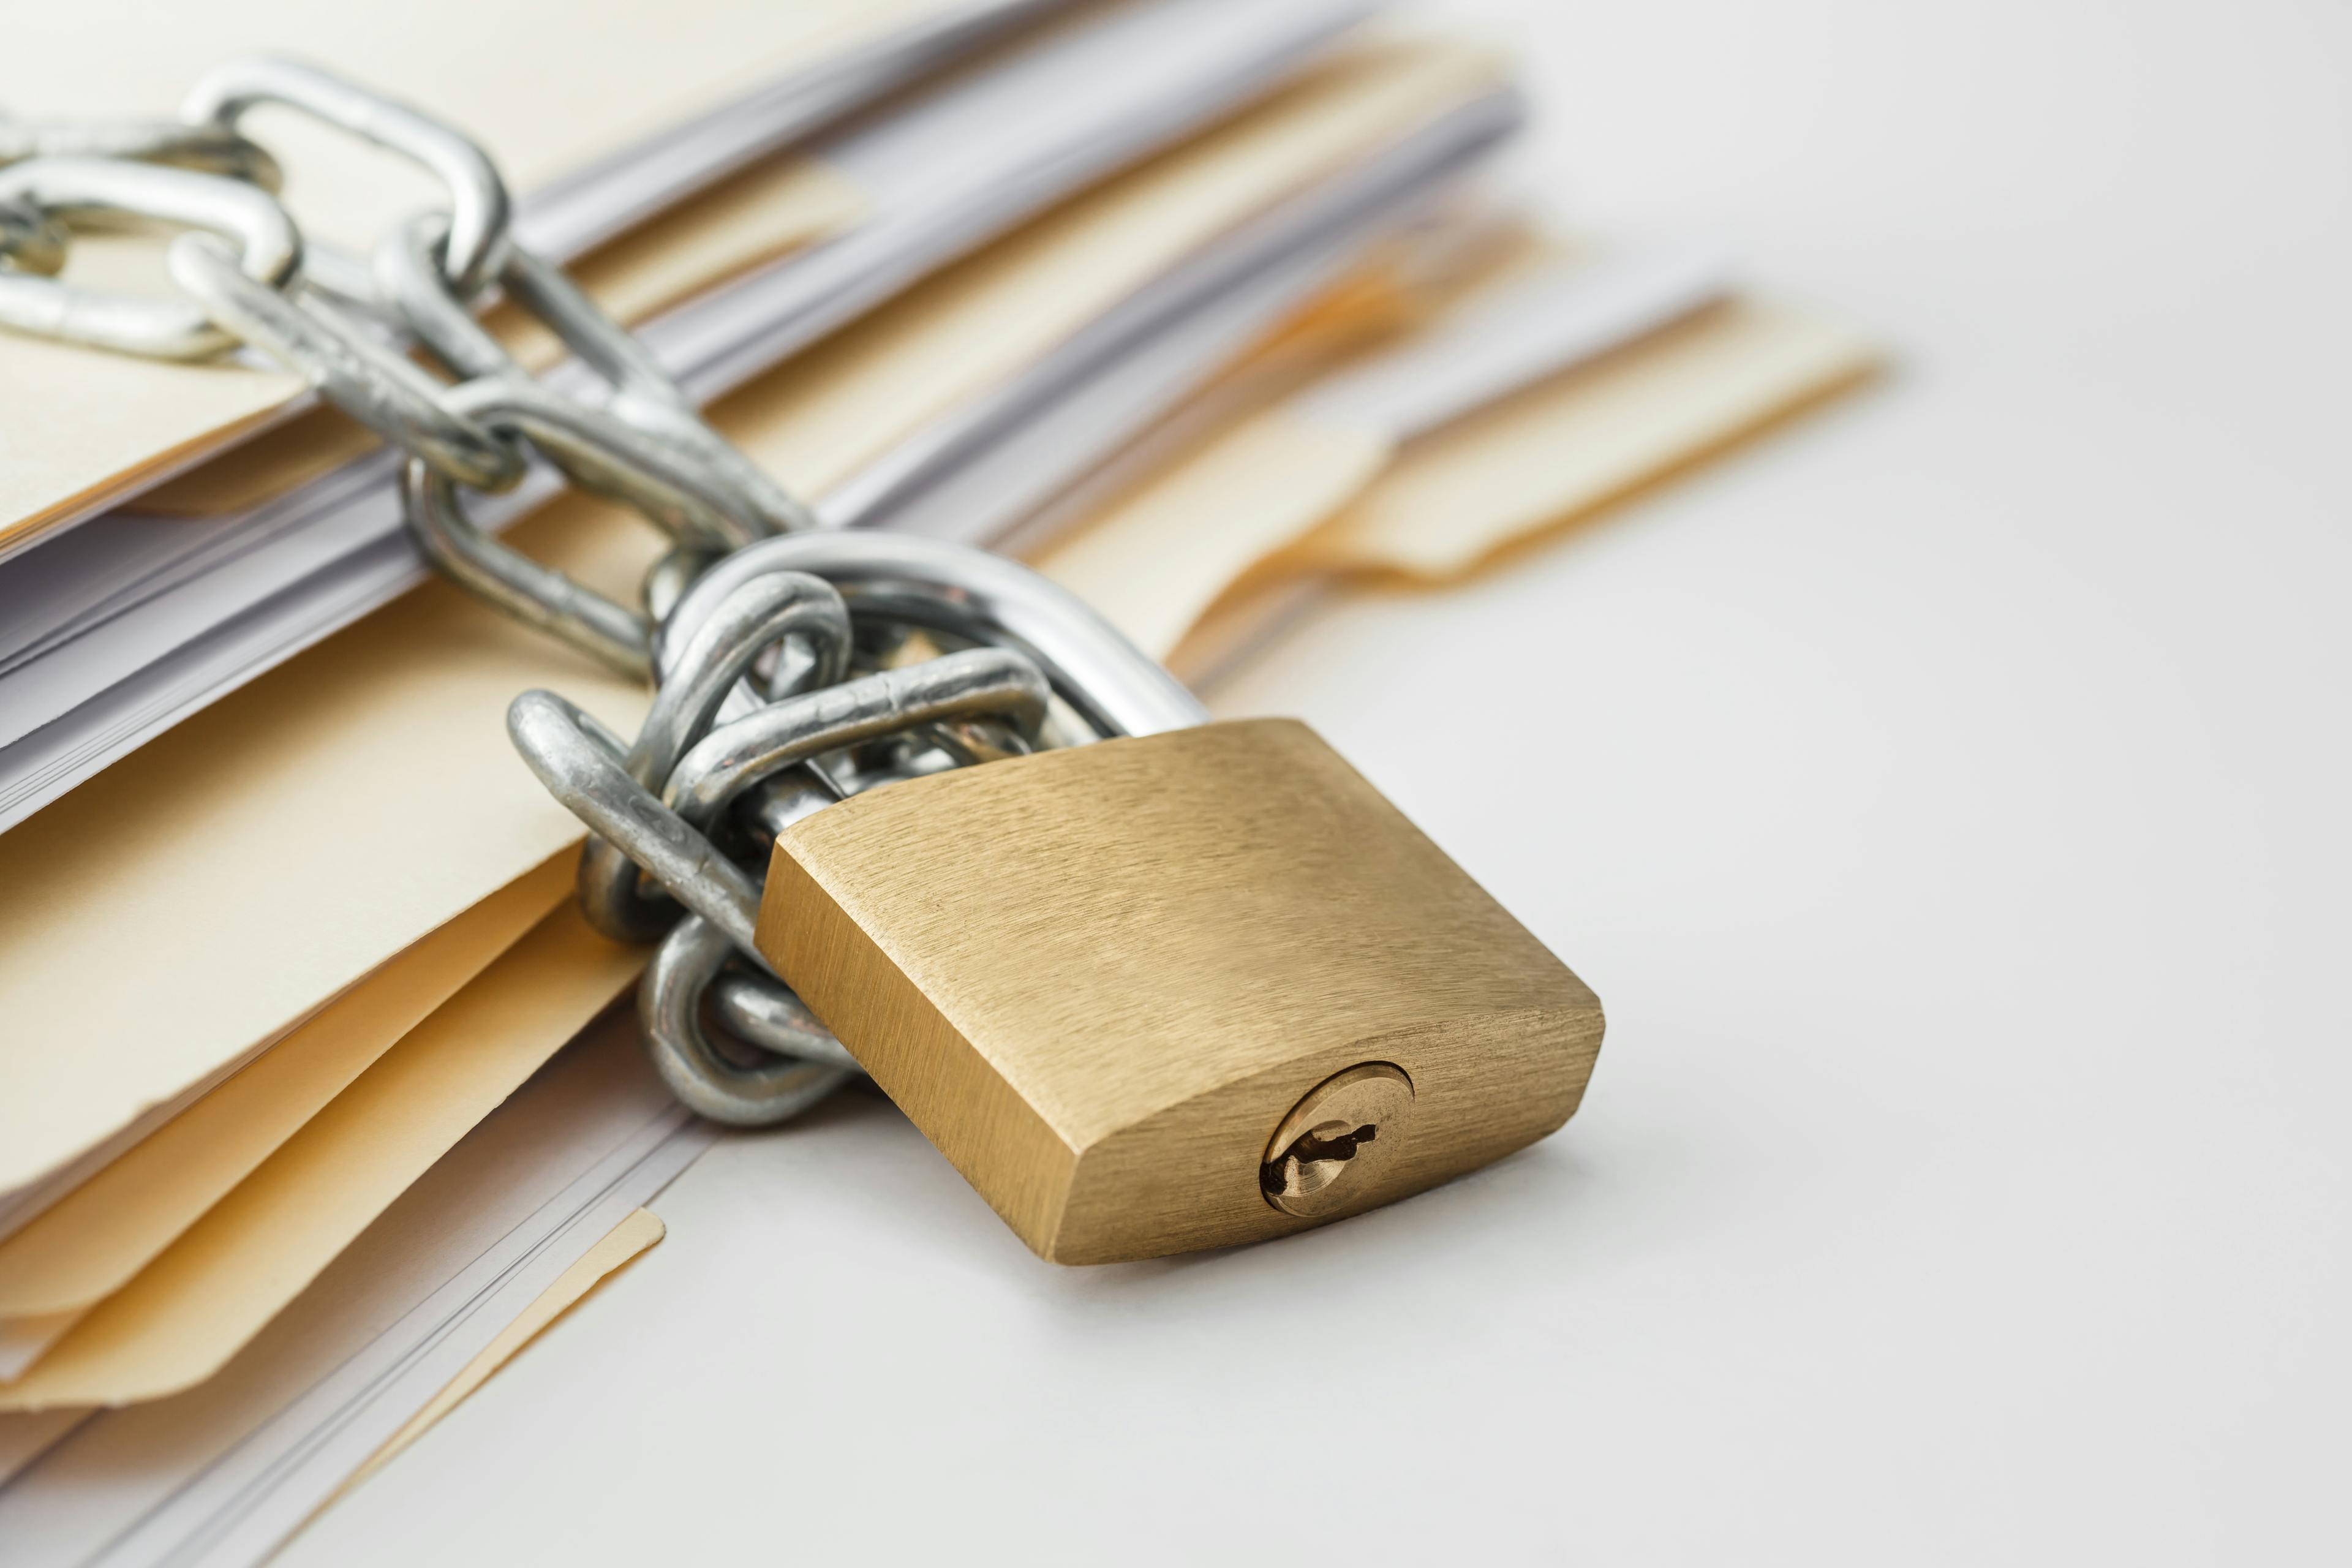 Security features to look for when choosing a document management system